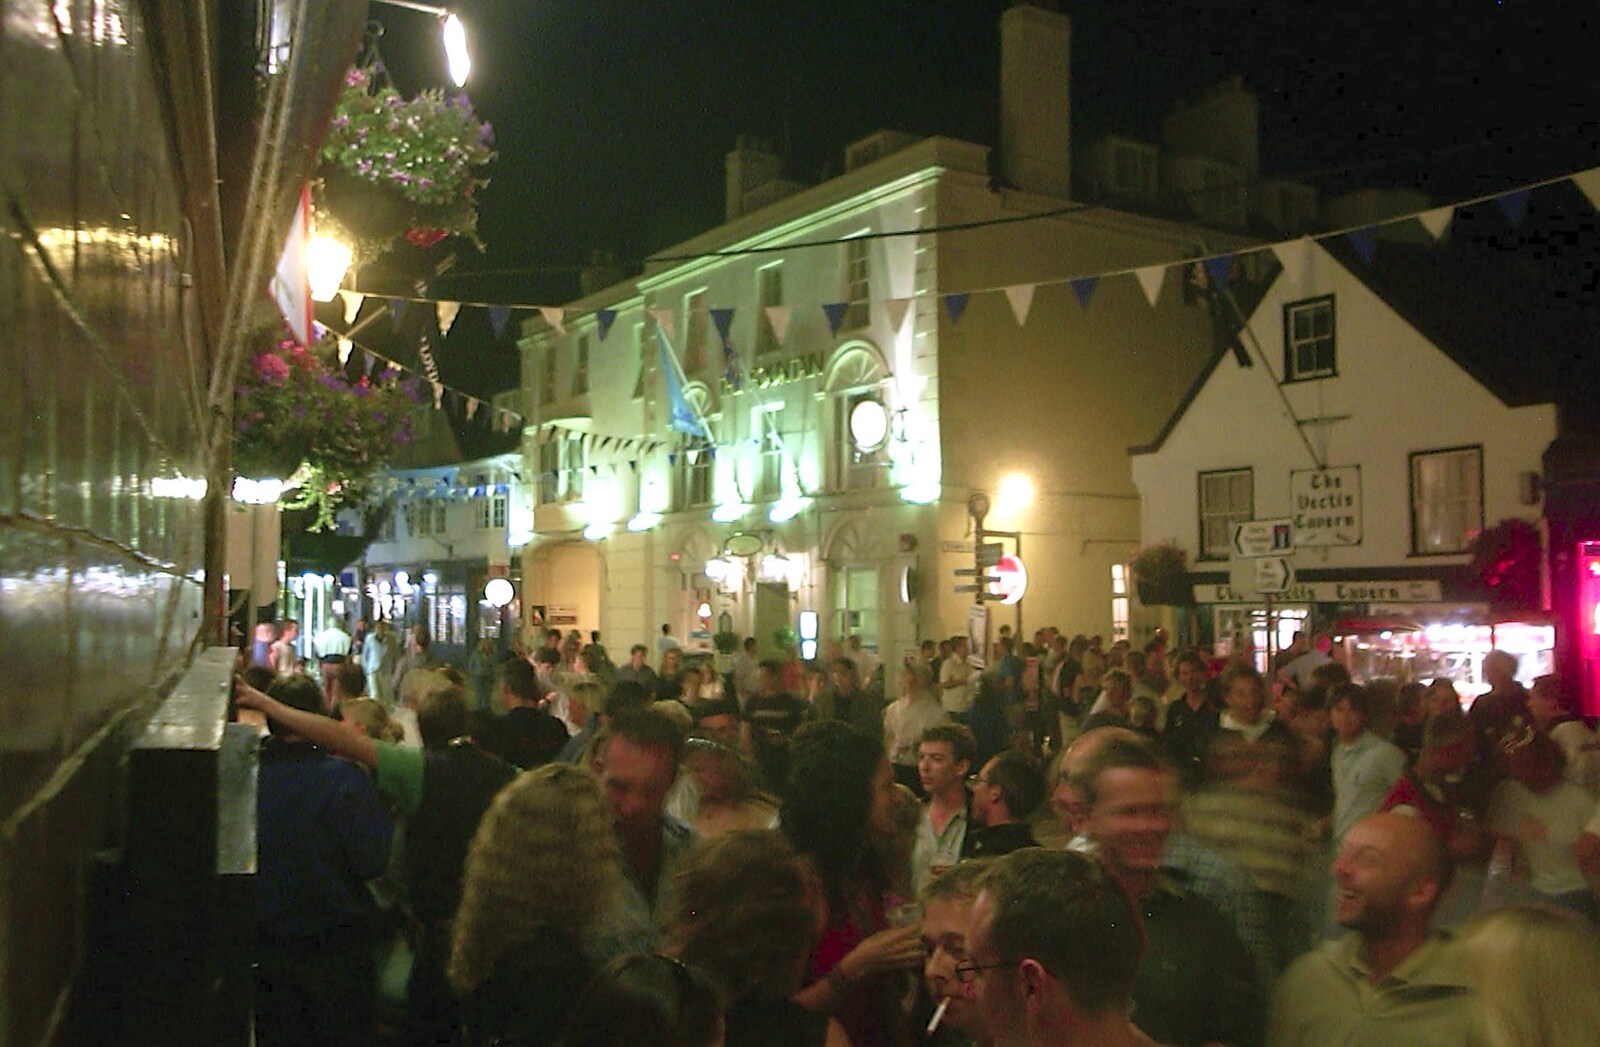 Revellers are out on the street from Cowes Weekend, Cowes, Isle of Wight - 7th August 2004